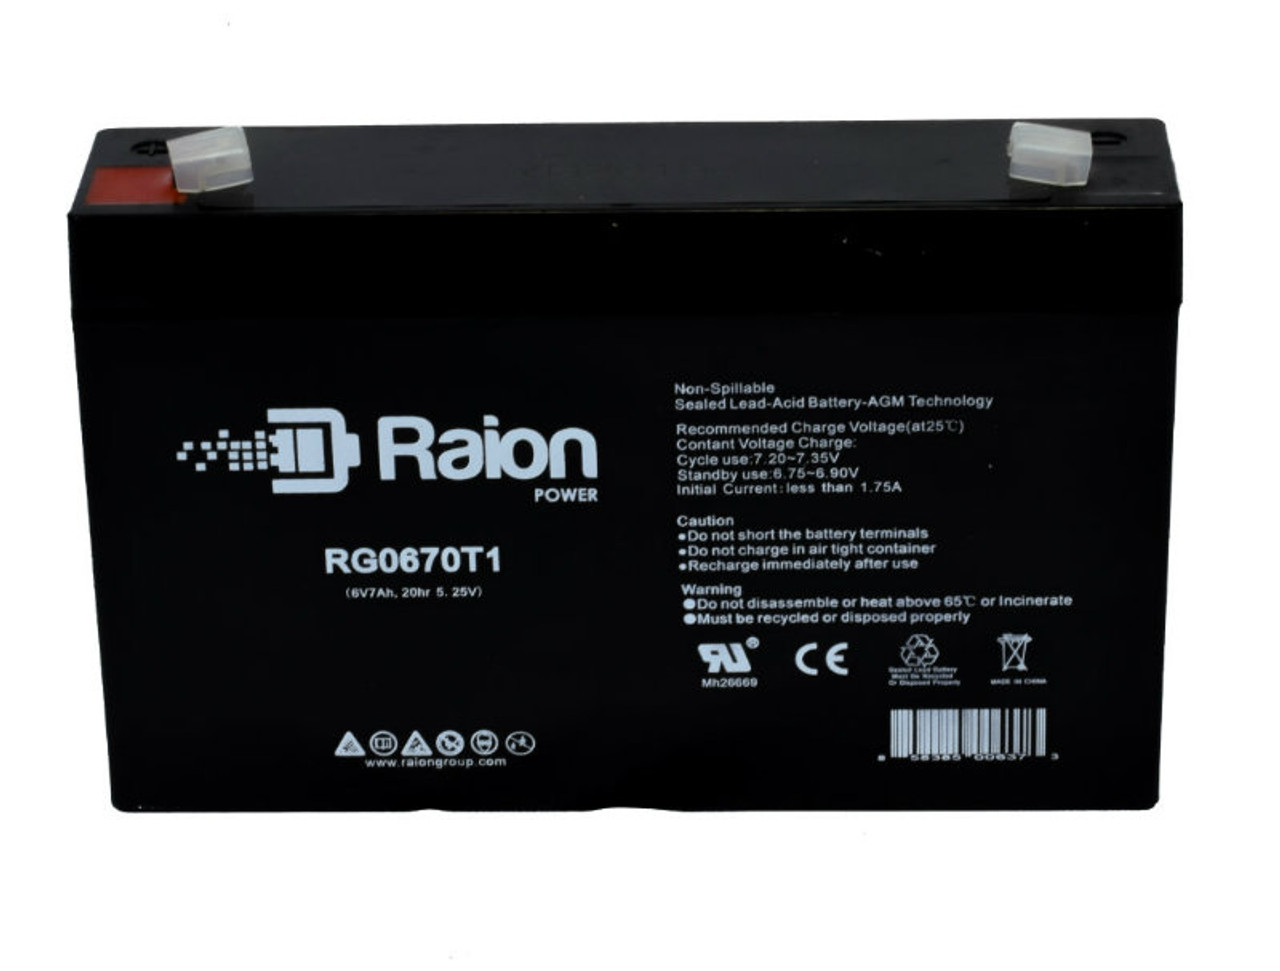 Raion Power RG0670T1 Replacement Battery Cartridge for Philips 300i